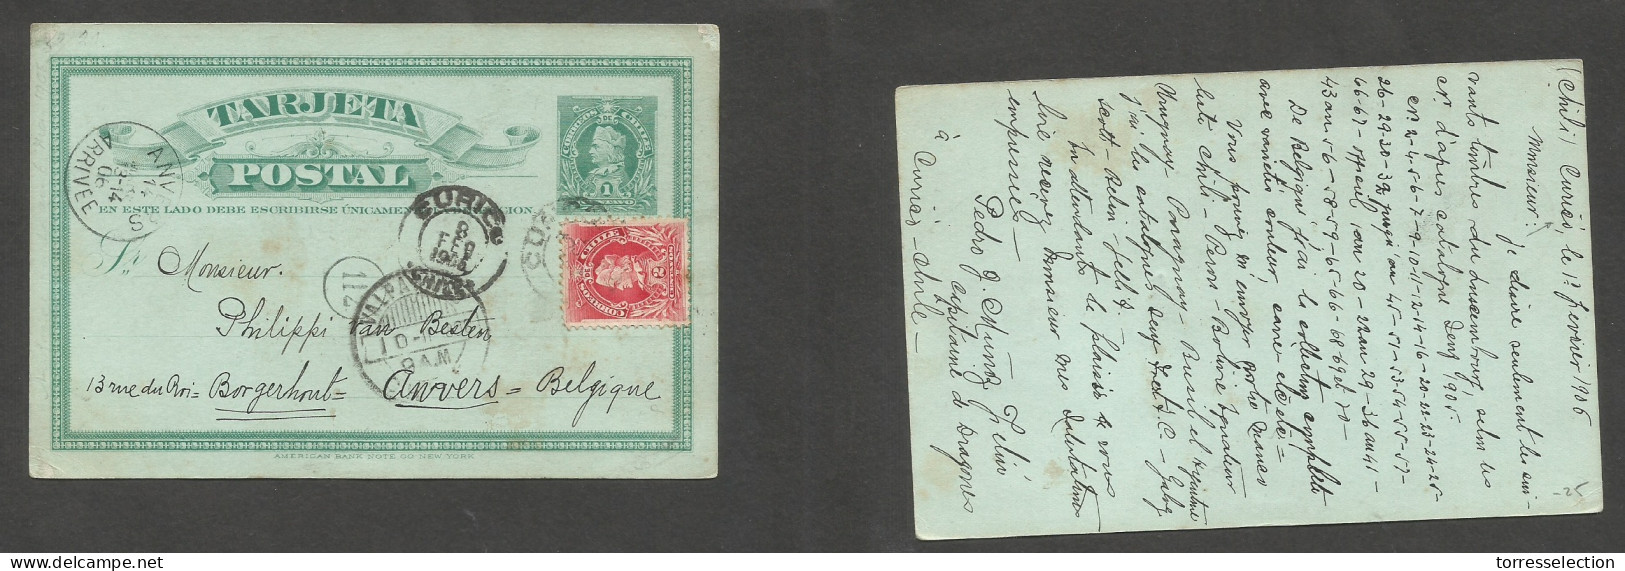 CHILE - Stationery. 1906 (1 Febr) Curicó - Belgium, Anvers (14 March) 1c Green Stat Card + 2c Red Adtl, Cds. Via Valp. B - Chile